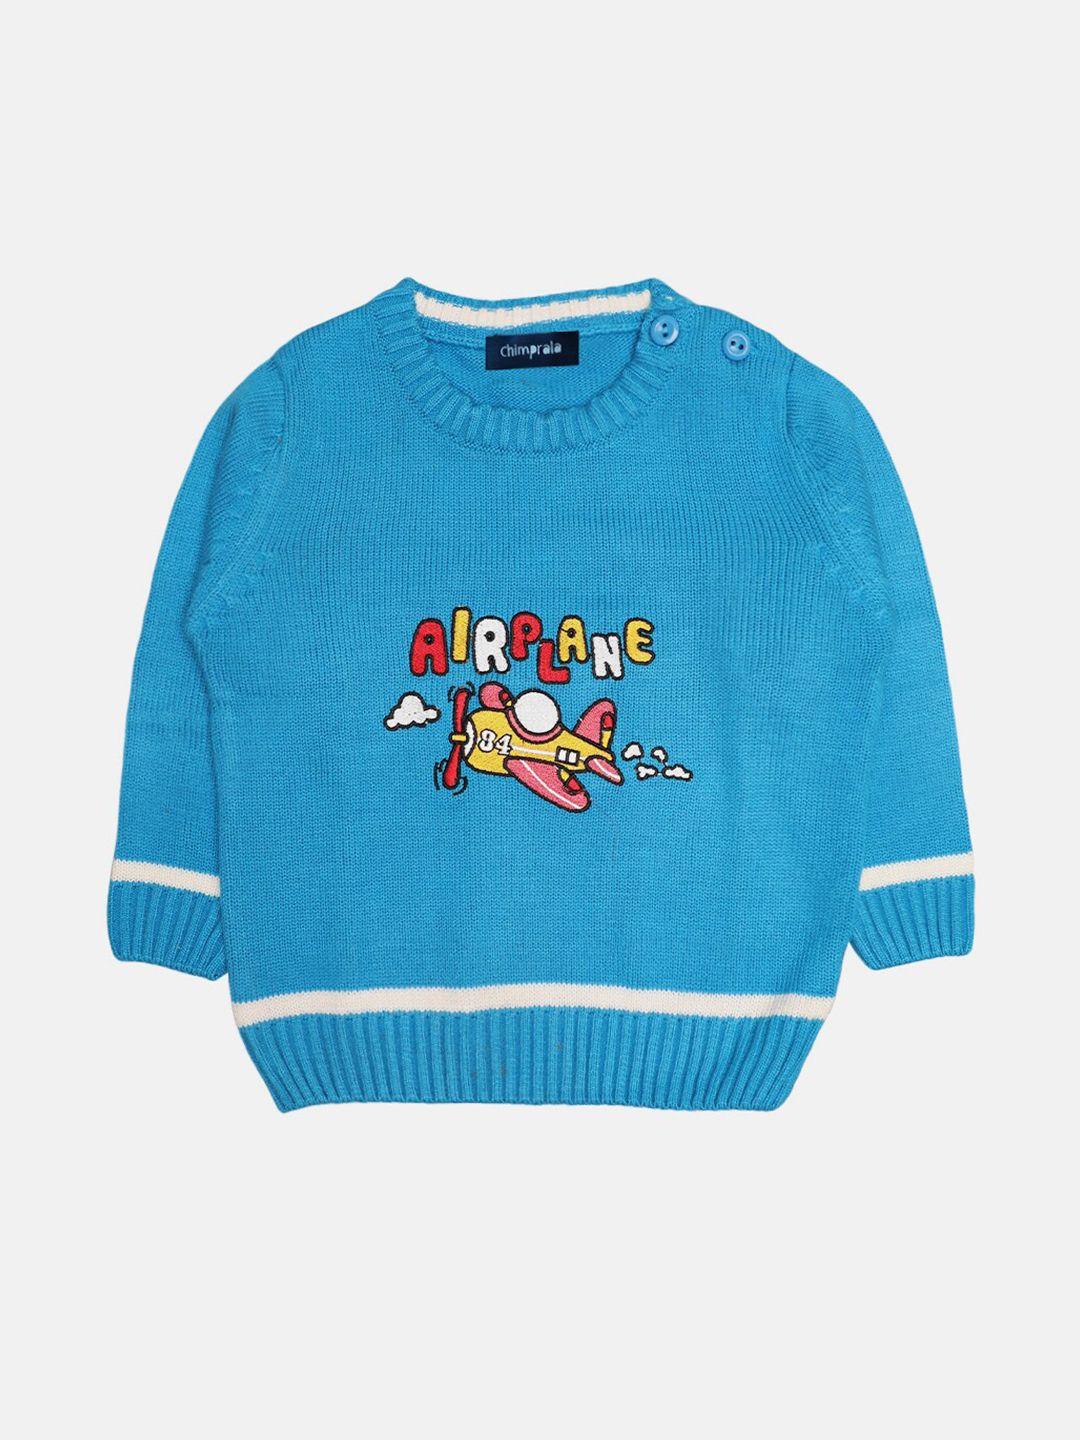 chimprala-boys-blue-&-red-typography-printed-pullover